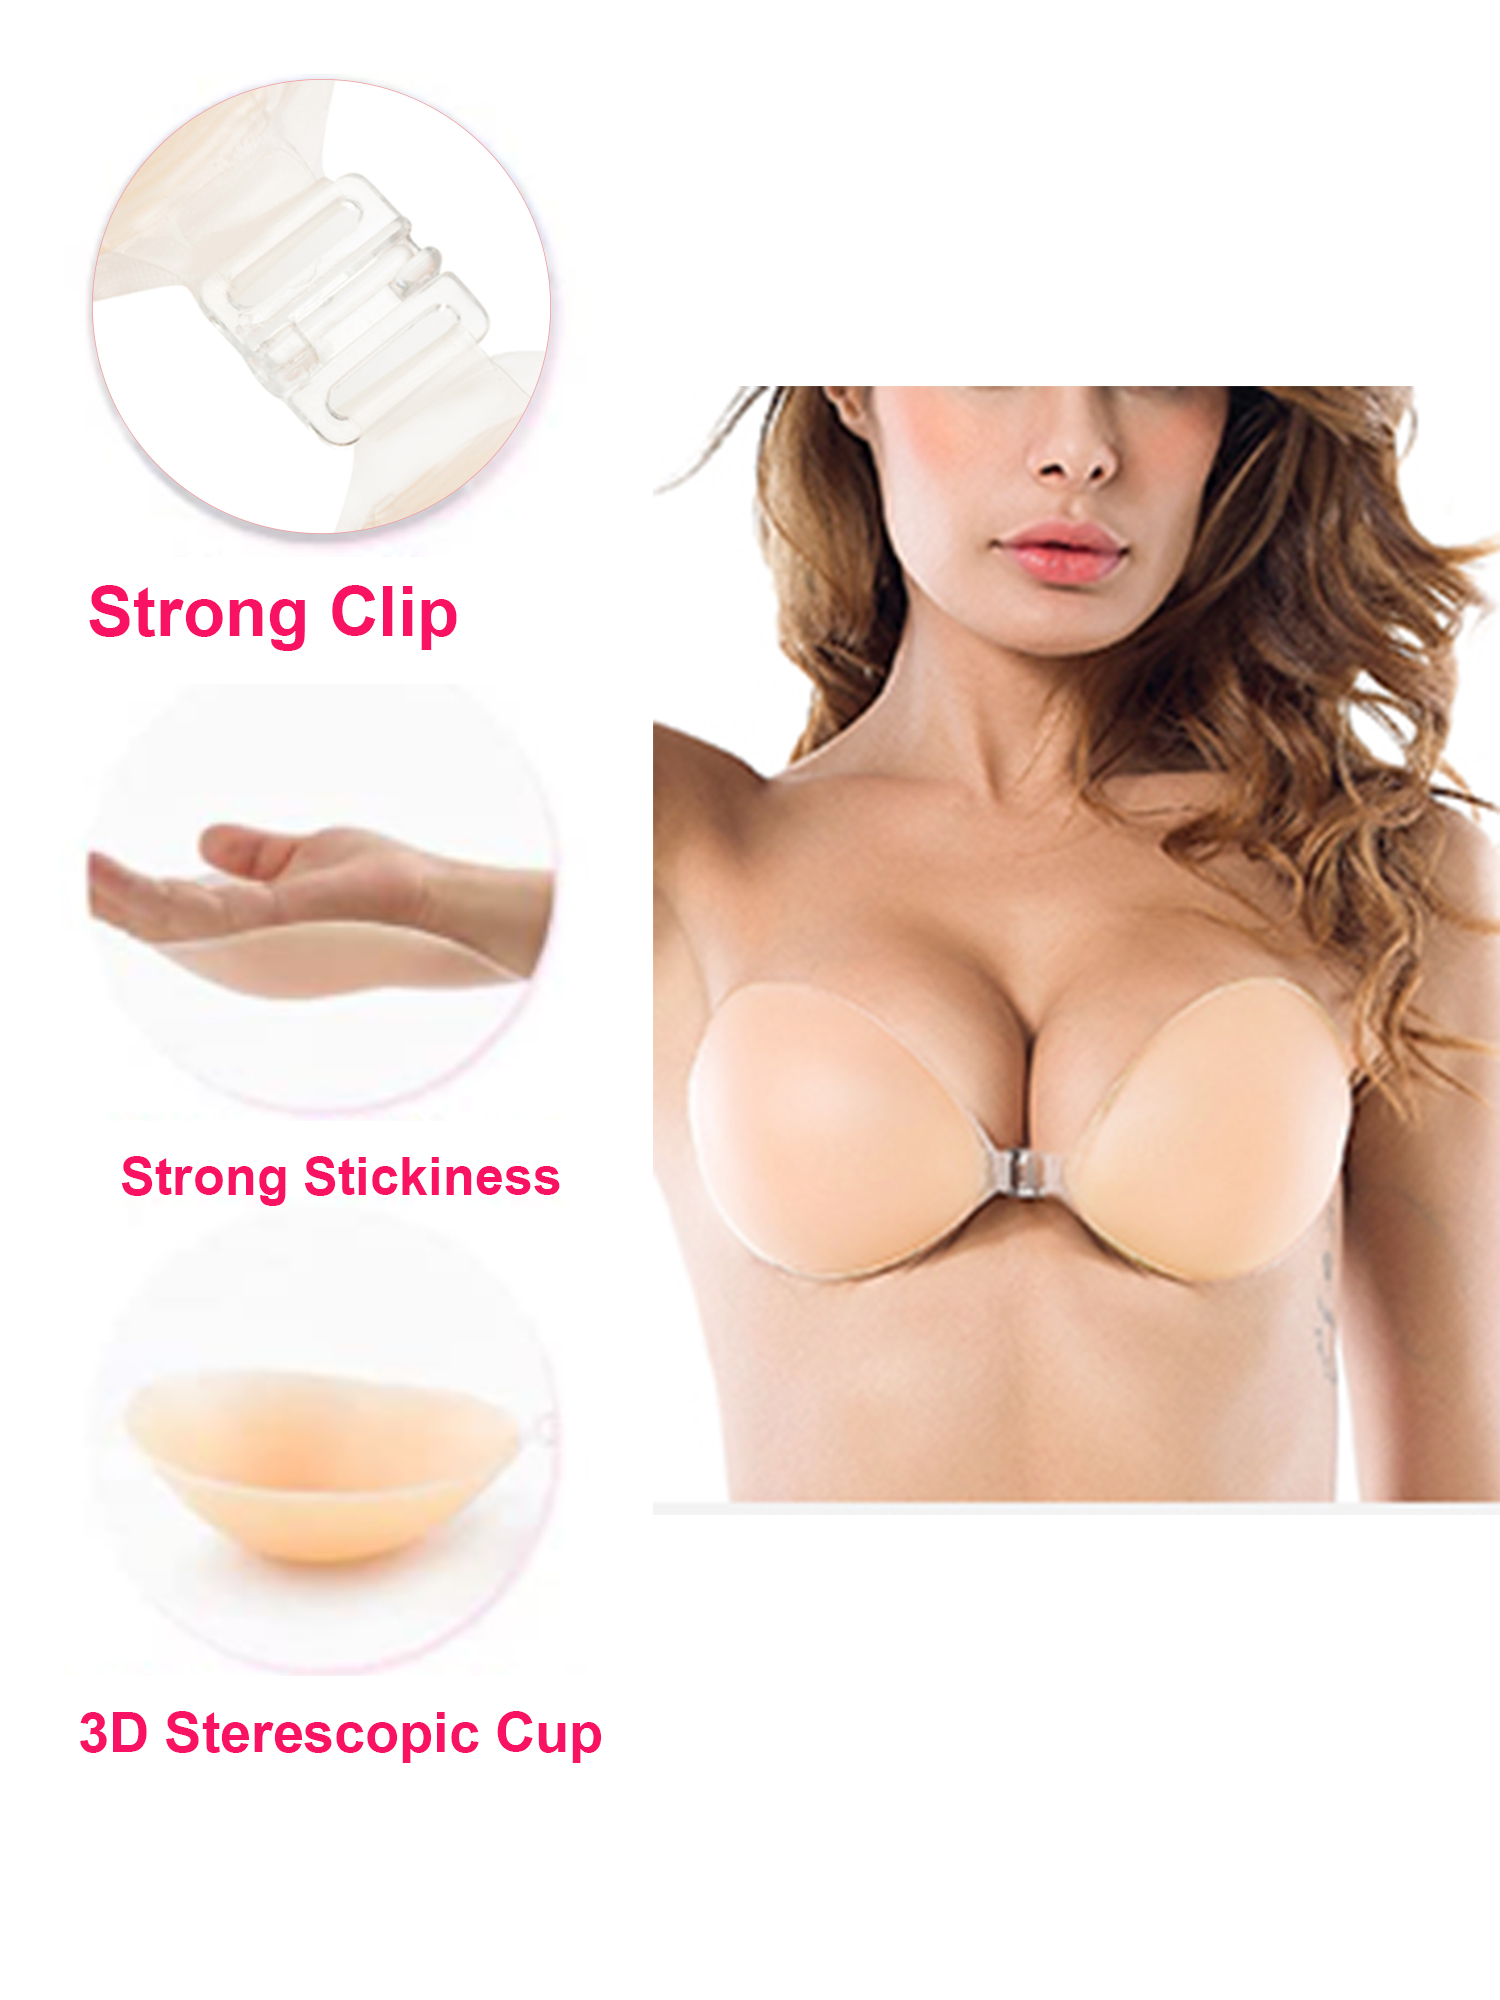 YouLoveIt Women Push Up Strapless Backless Bra Push Up Invisible Silicone Bras Strapless Invisible Bra Push up Silicone Bra with Nipple Cover - image 4 of 5